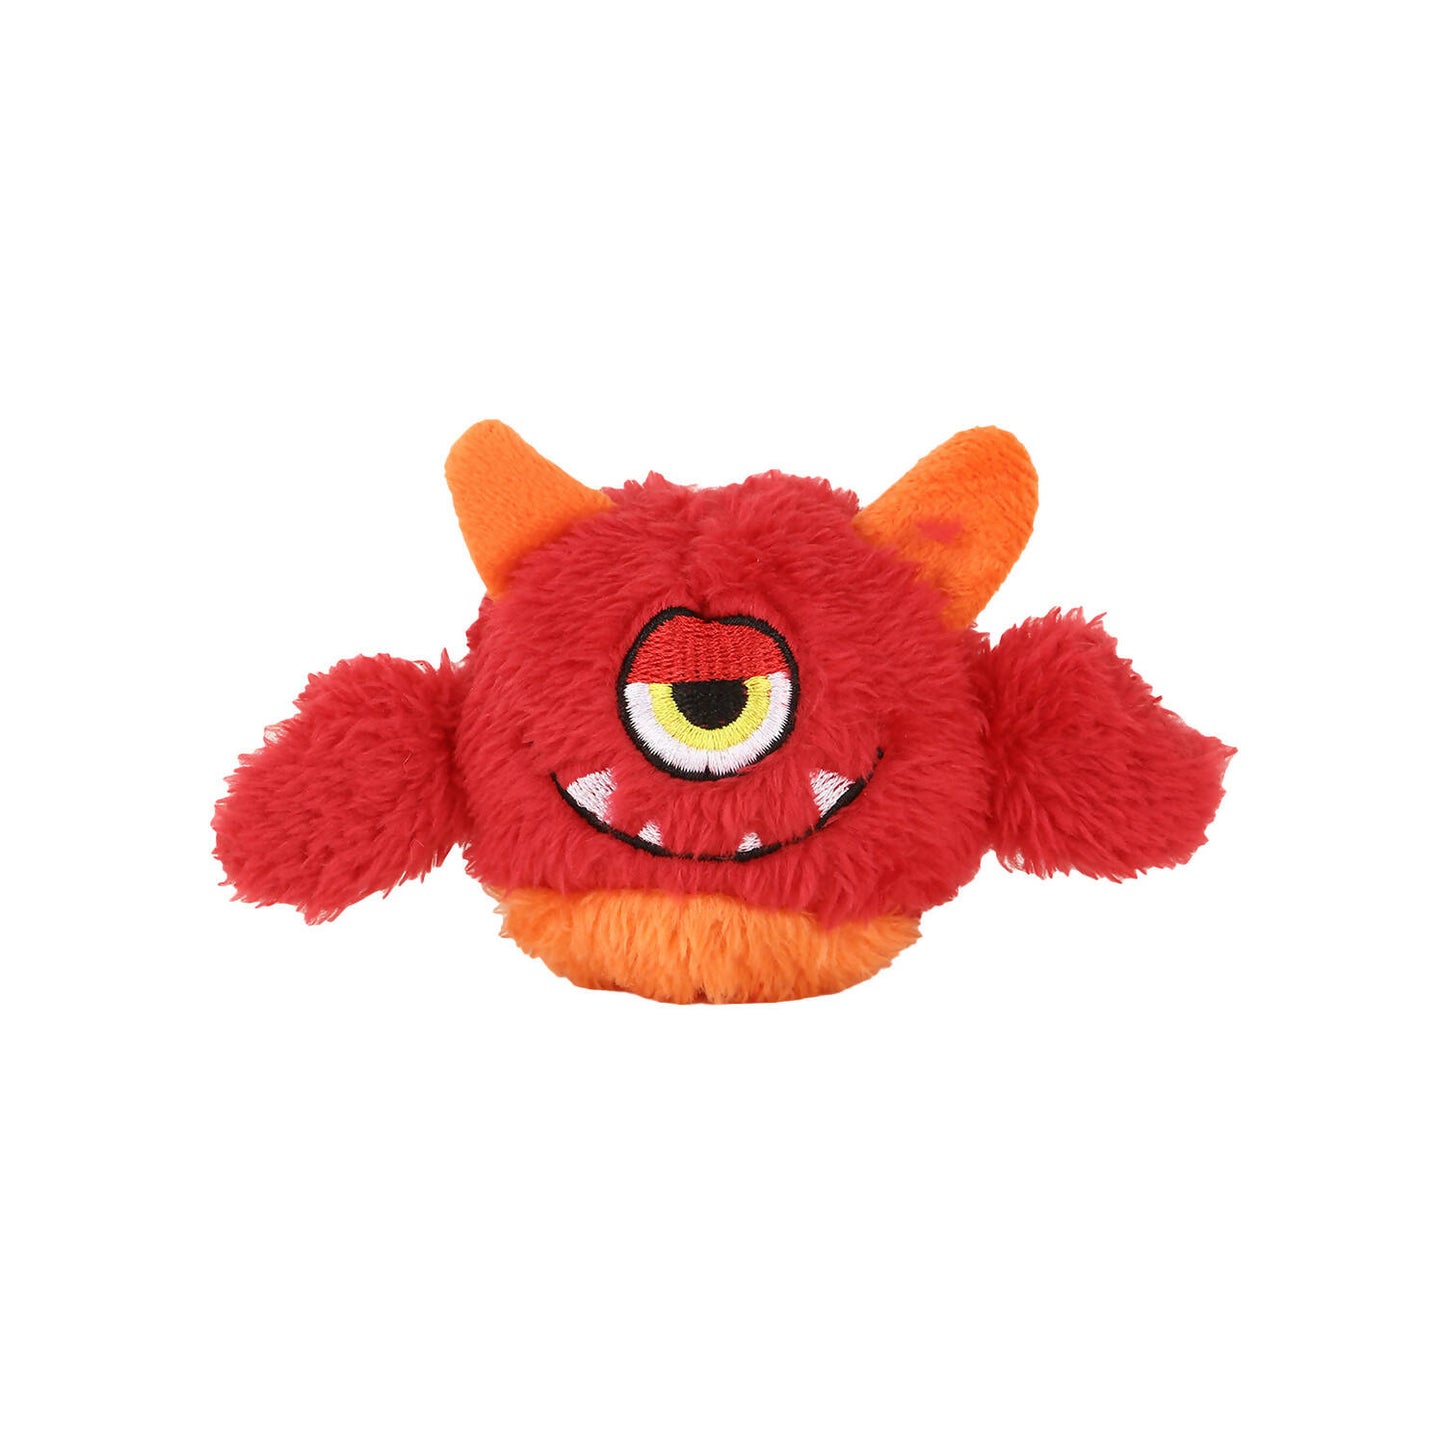 Basil - Plush Monster Ball with TPR Small Squeaky Ball Inside For Dogs